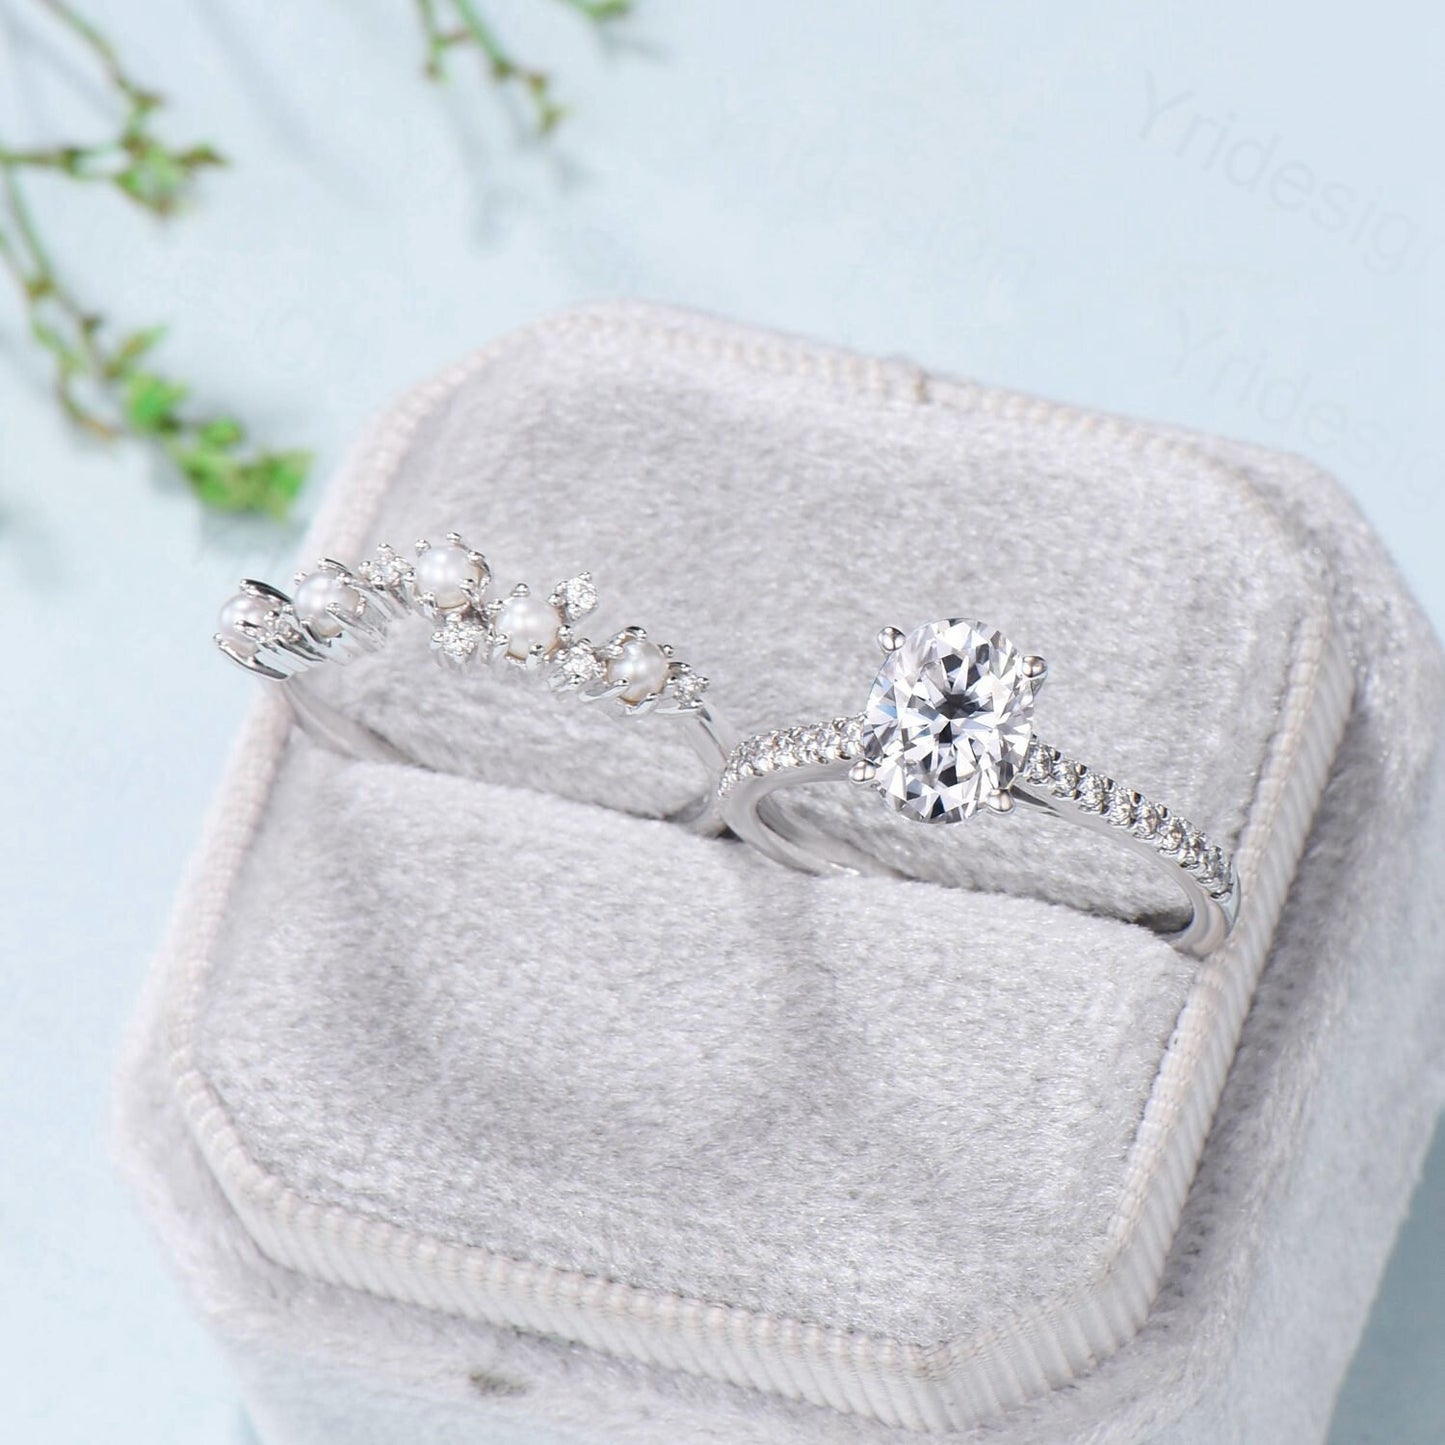 Unique Oval Moissanite Engagement Ring Set 14K White Gold Pave Eternity Diamond Wedding Ring Set Vintage Unique Pearl Stacking Band for her - PENFINE